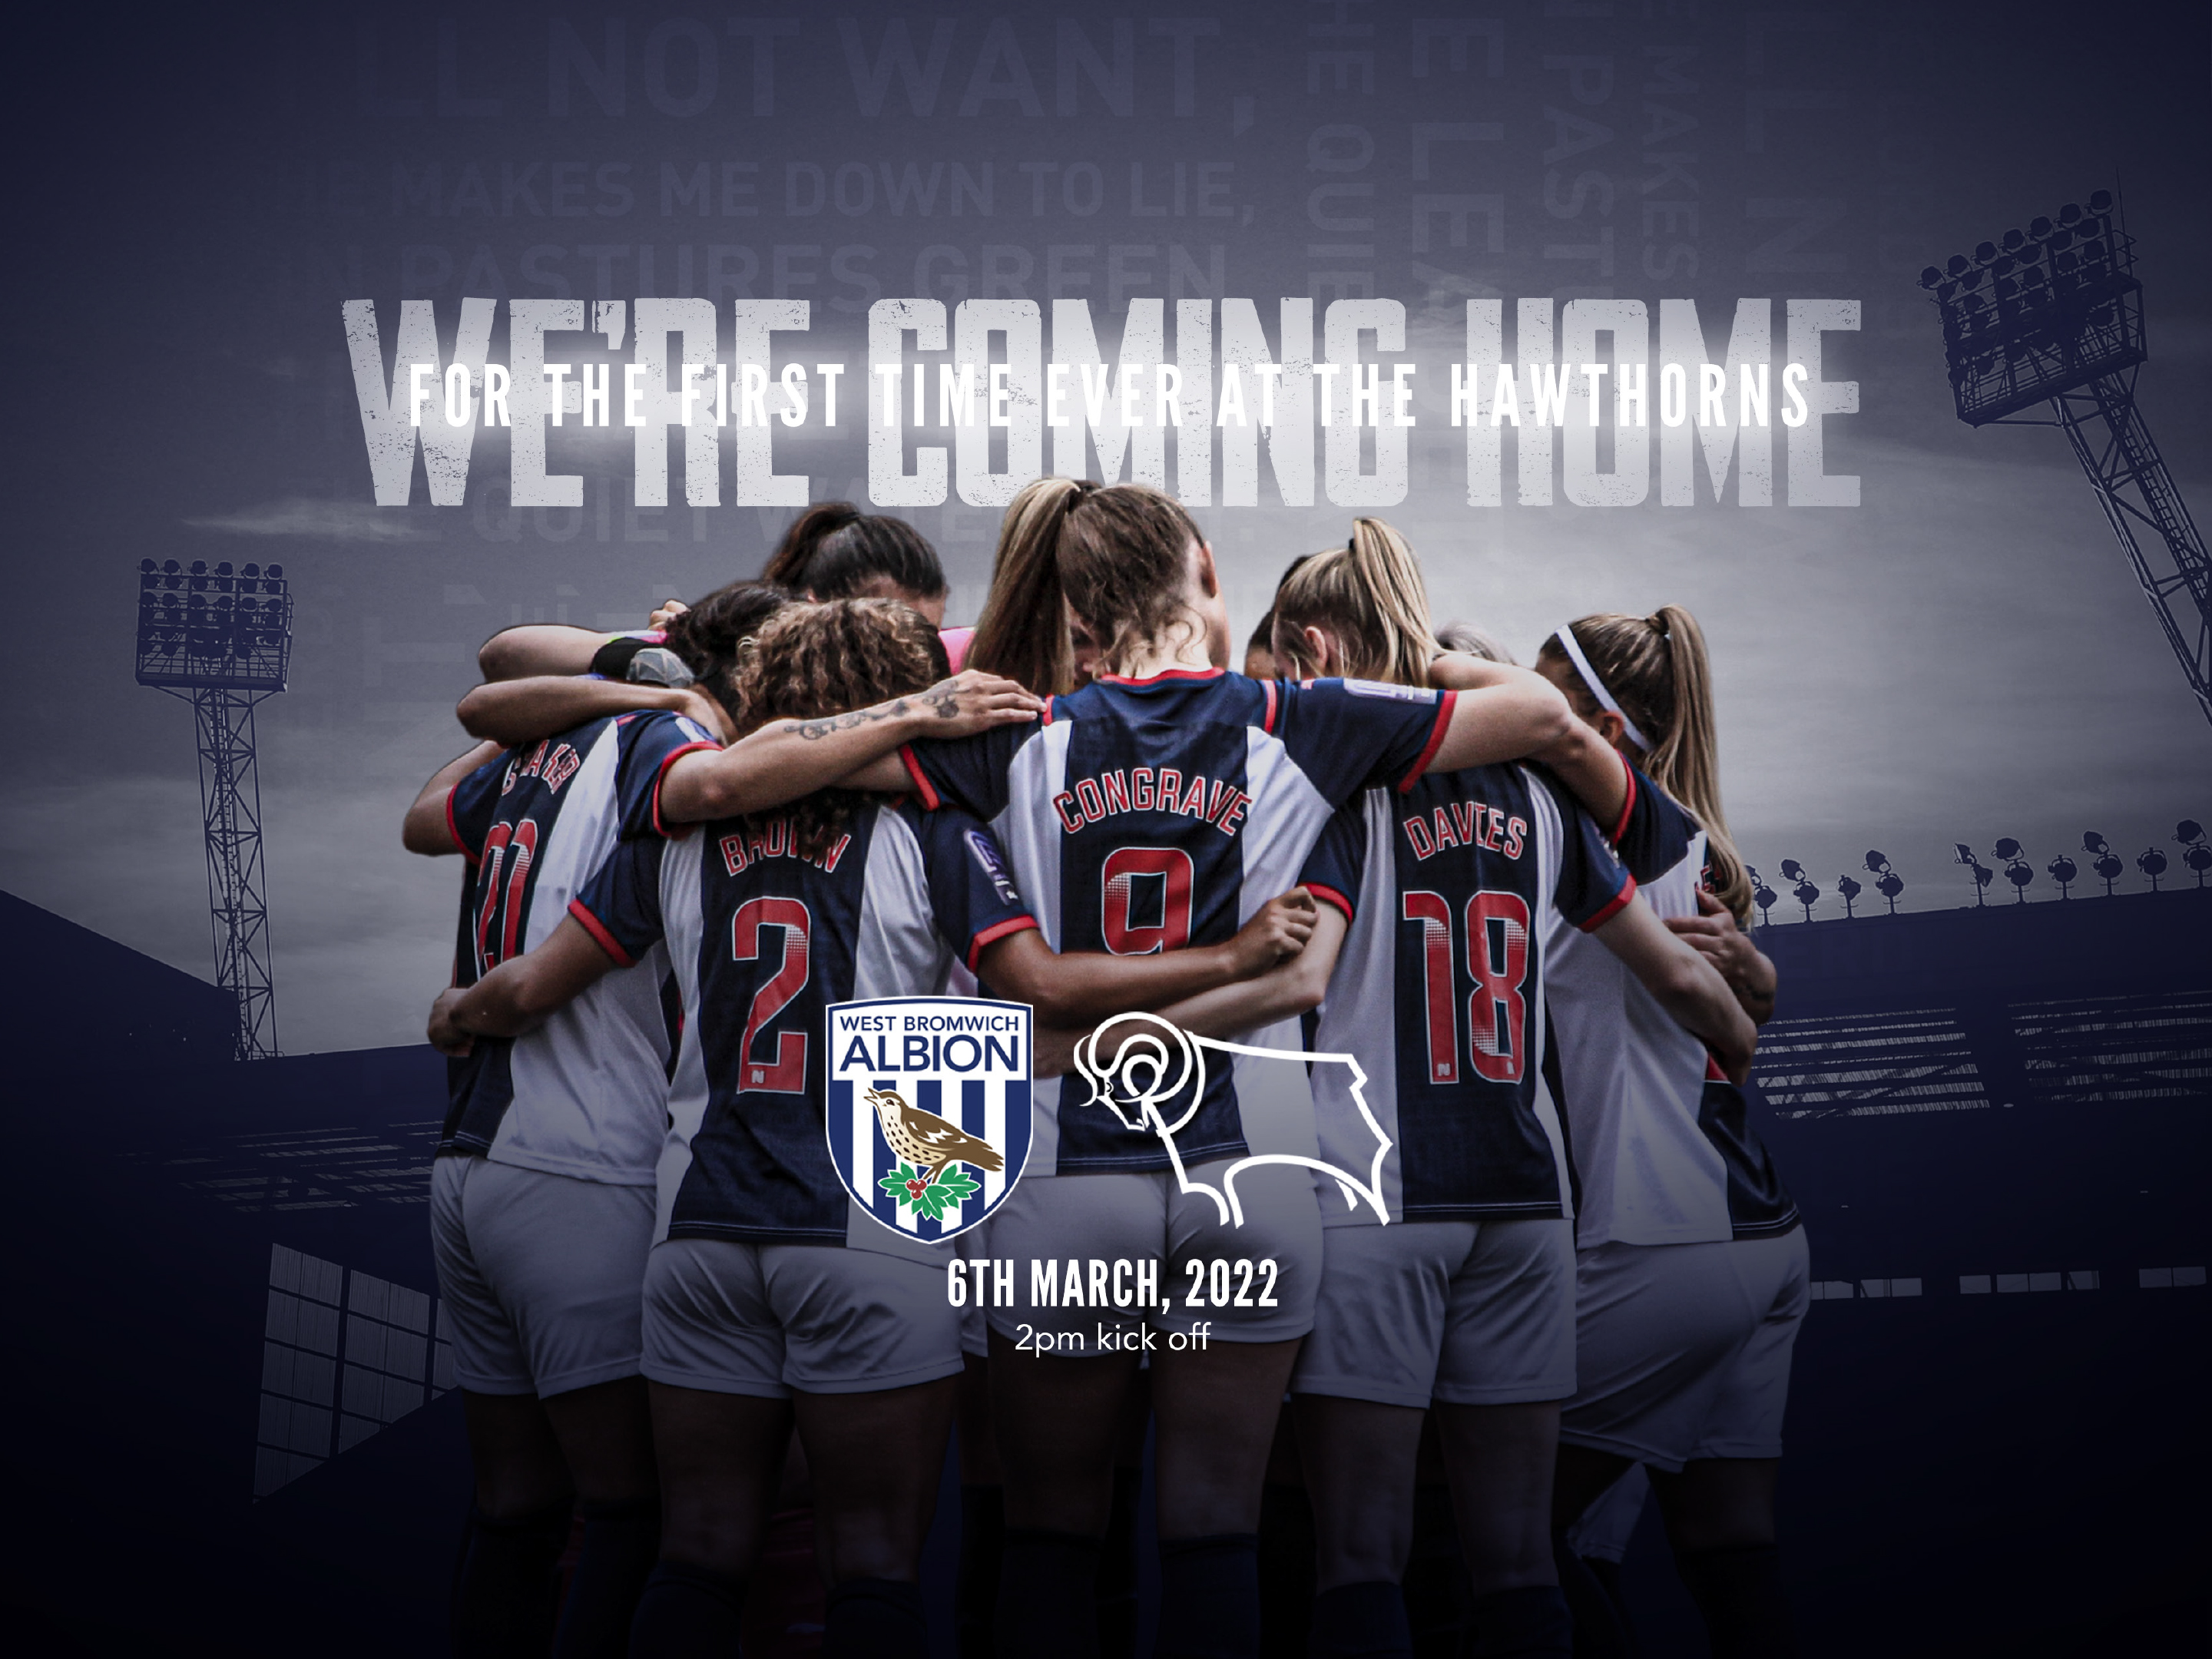 West Bromwich Albion Women will make history in March when they play their first official match at The Hawthorns, the home of their male counterparts since 1900